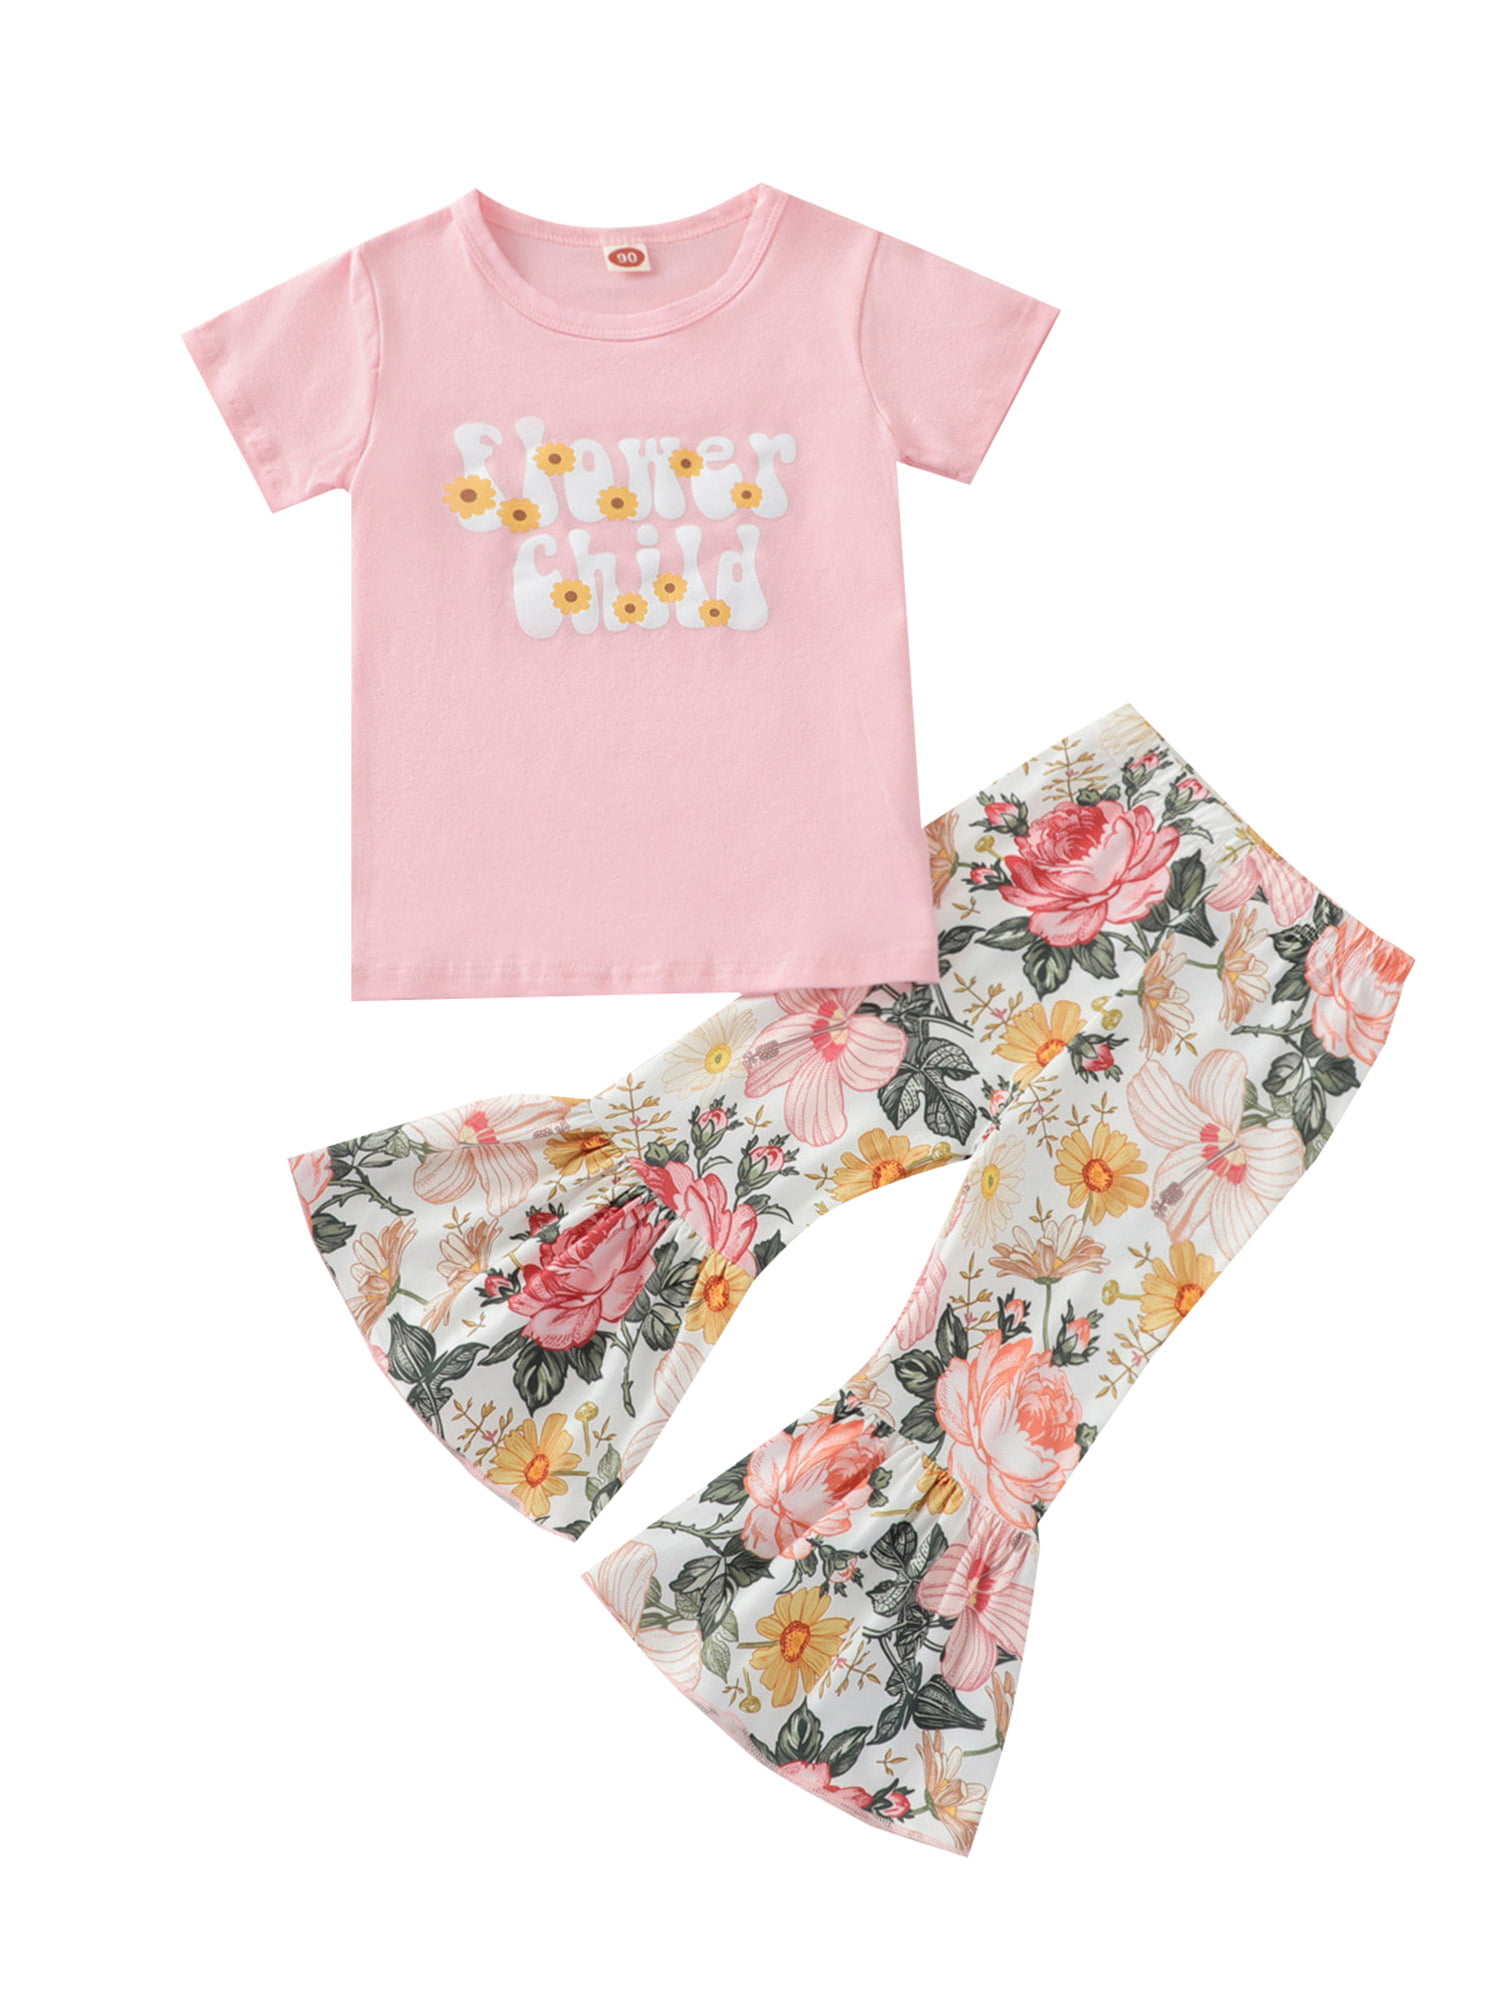 Baby Girls Outfits Kids Ruffle Letter Print Short Sleeves top+Floral Print Bell Bottom Pant 2Pcs Summer Clothes